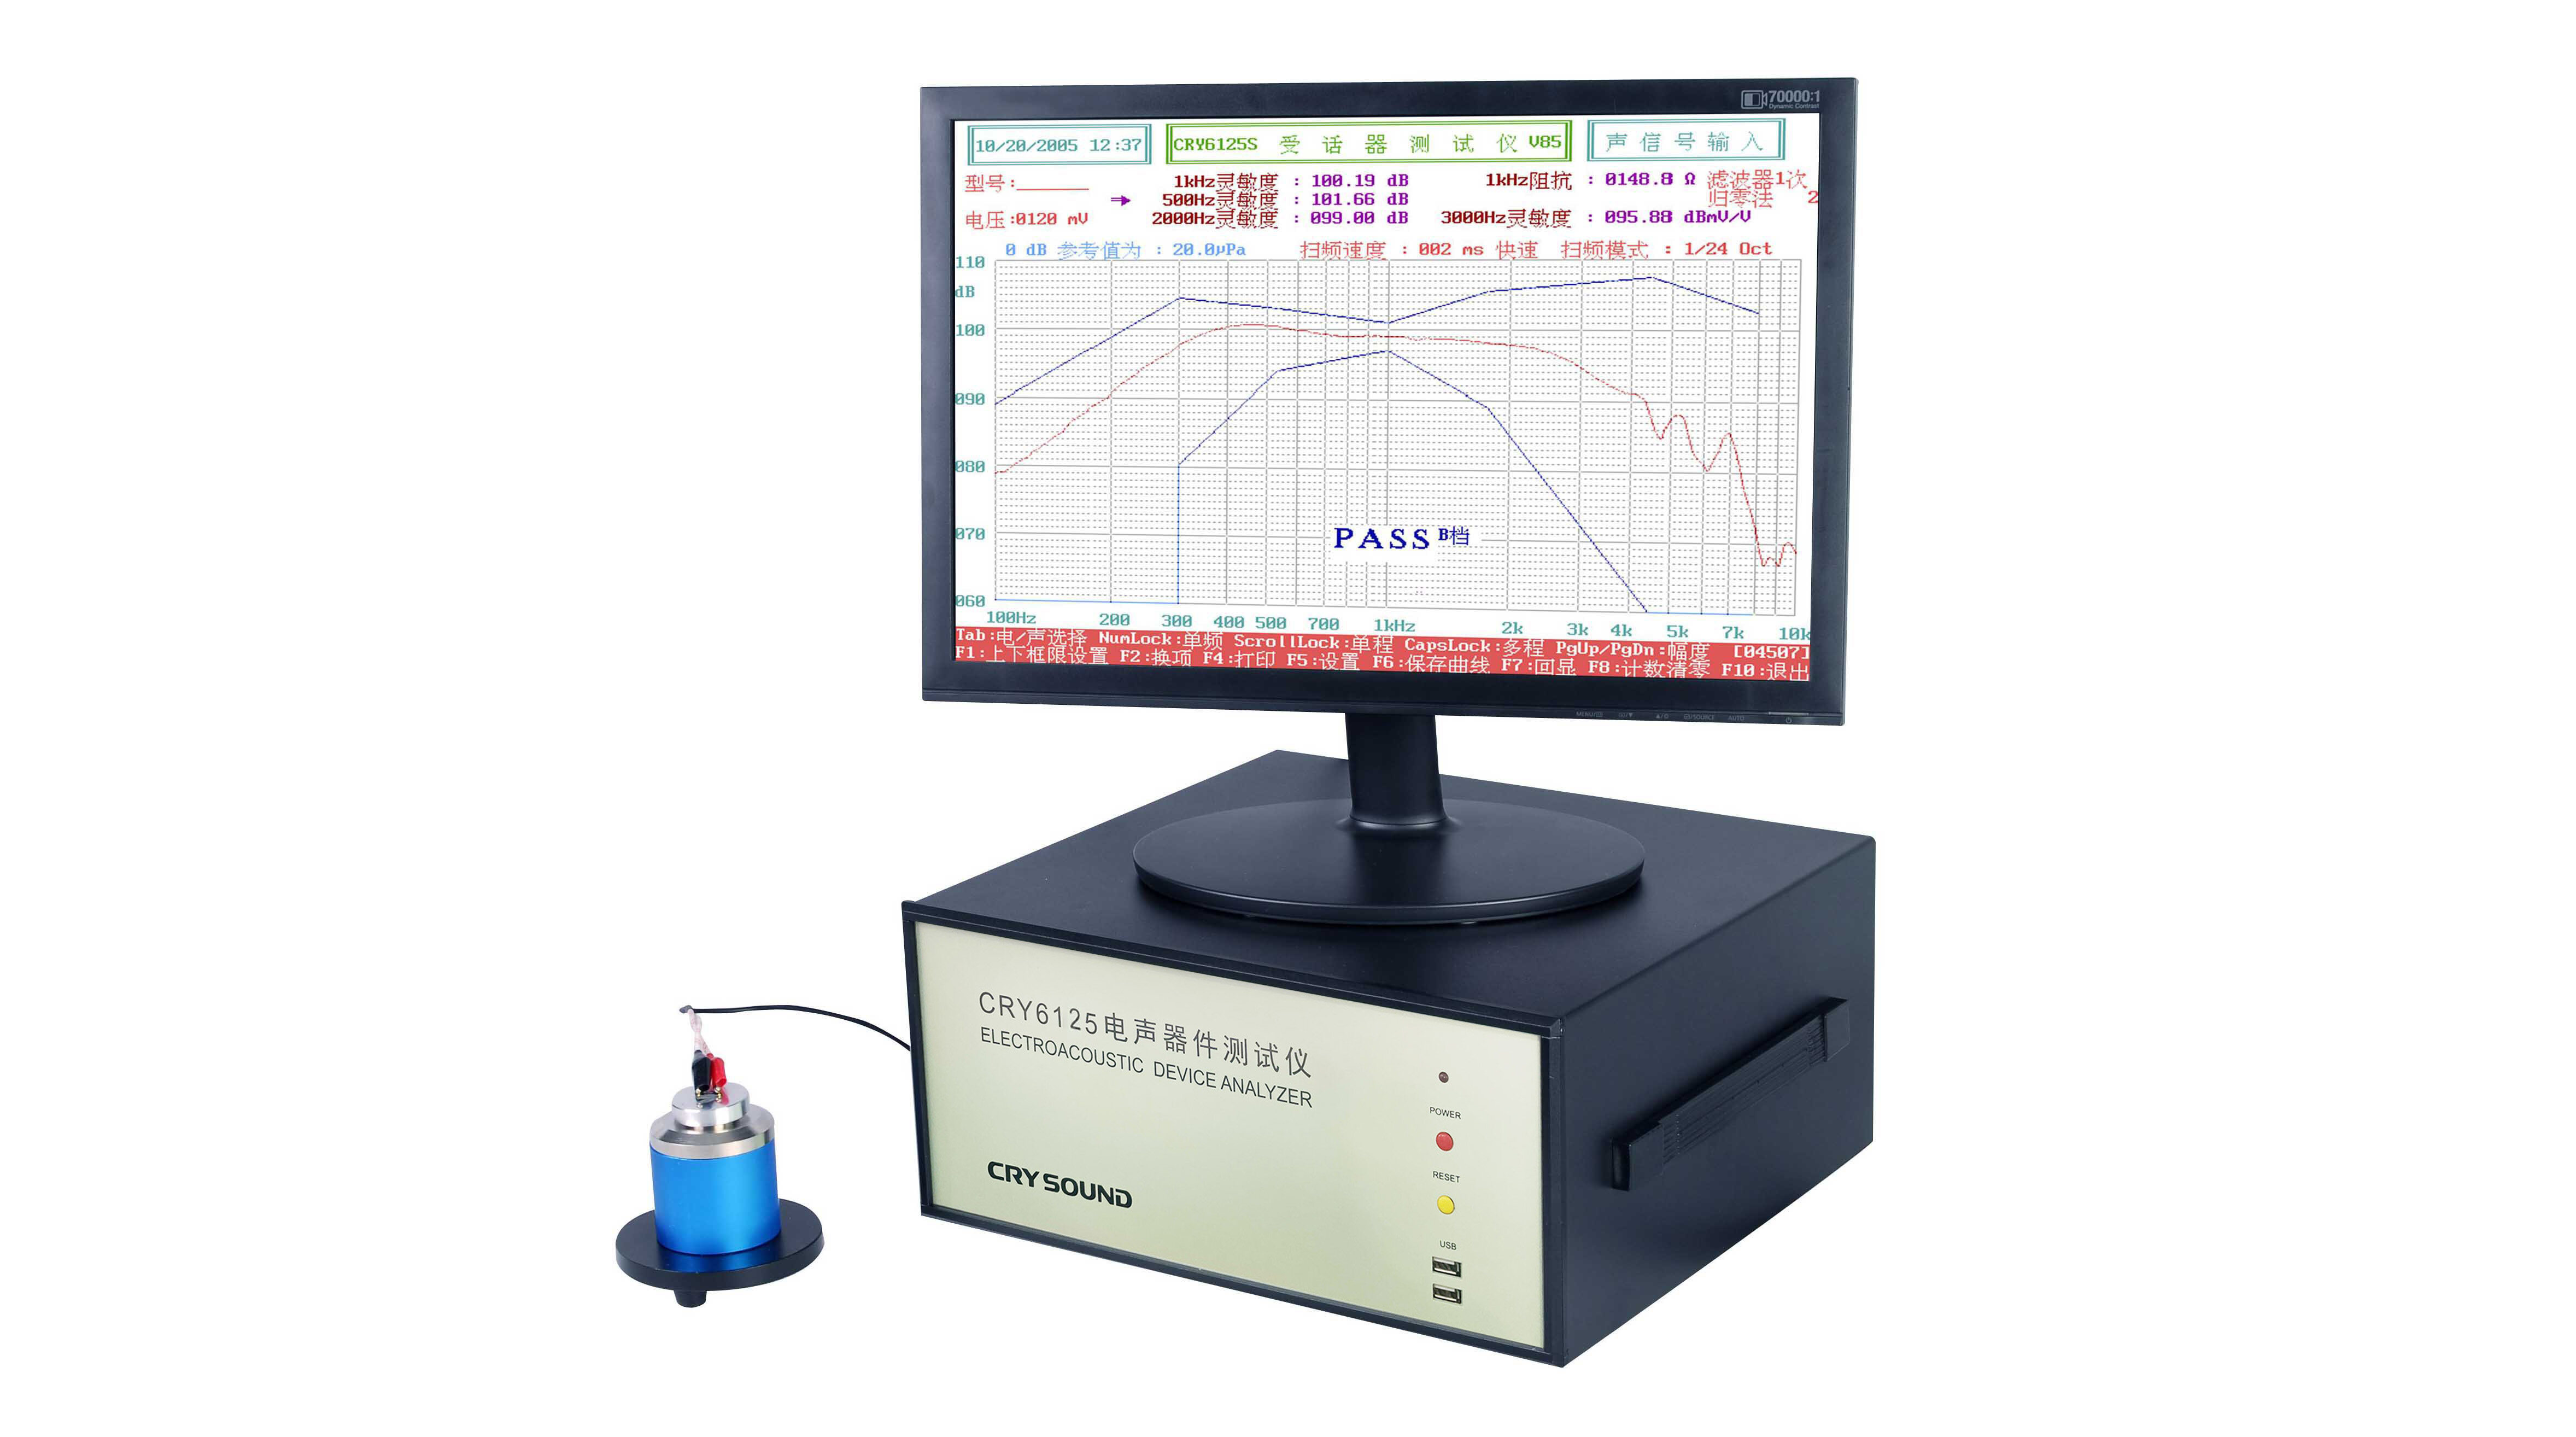 Electroacoustic analysis system